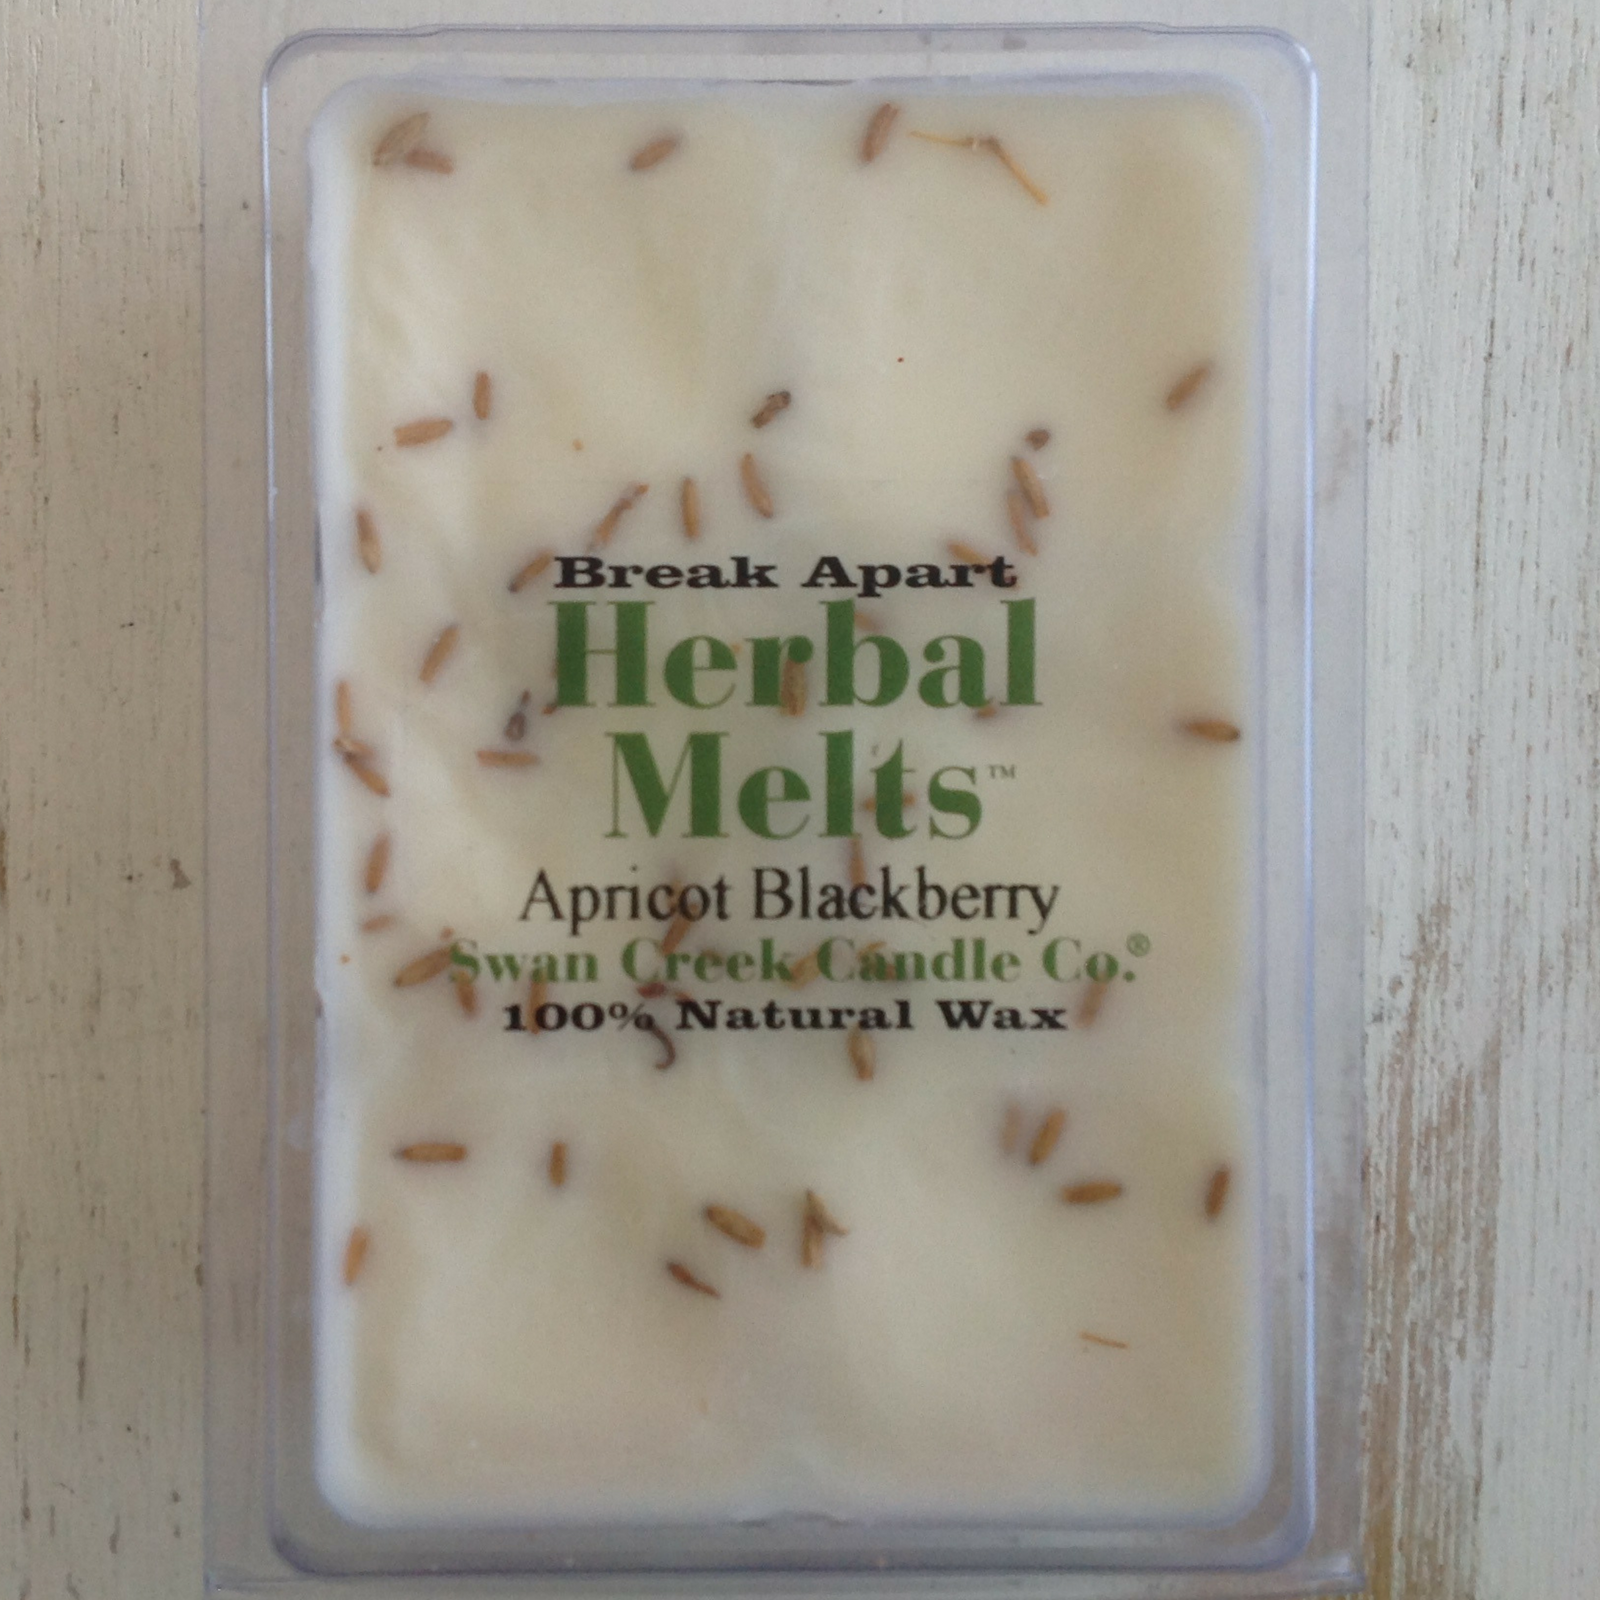 Swan Creek Candle Company Herbal Drizzle Wax Melts Apricot Blackberry